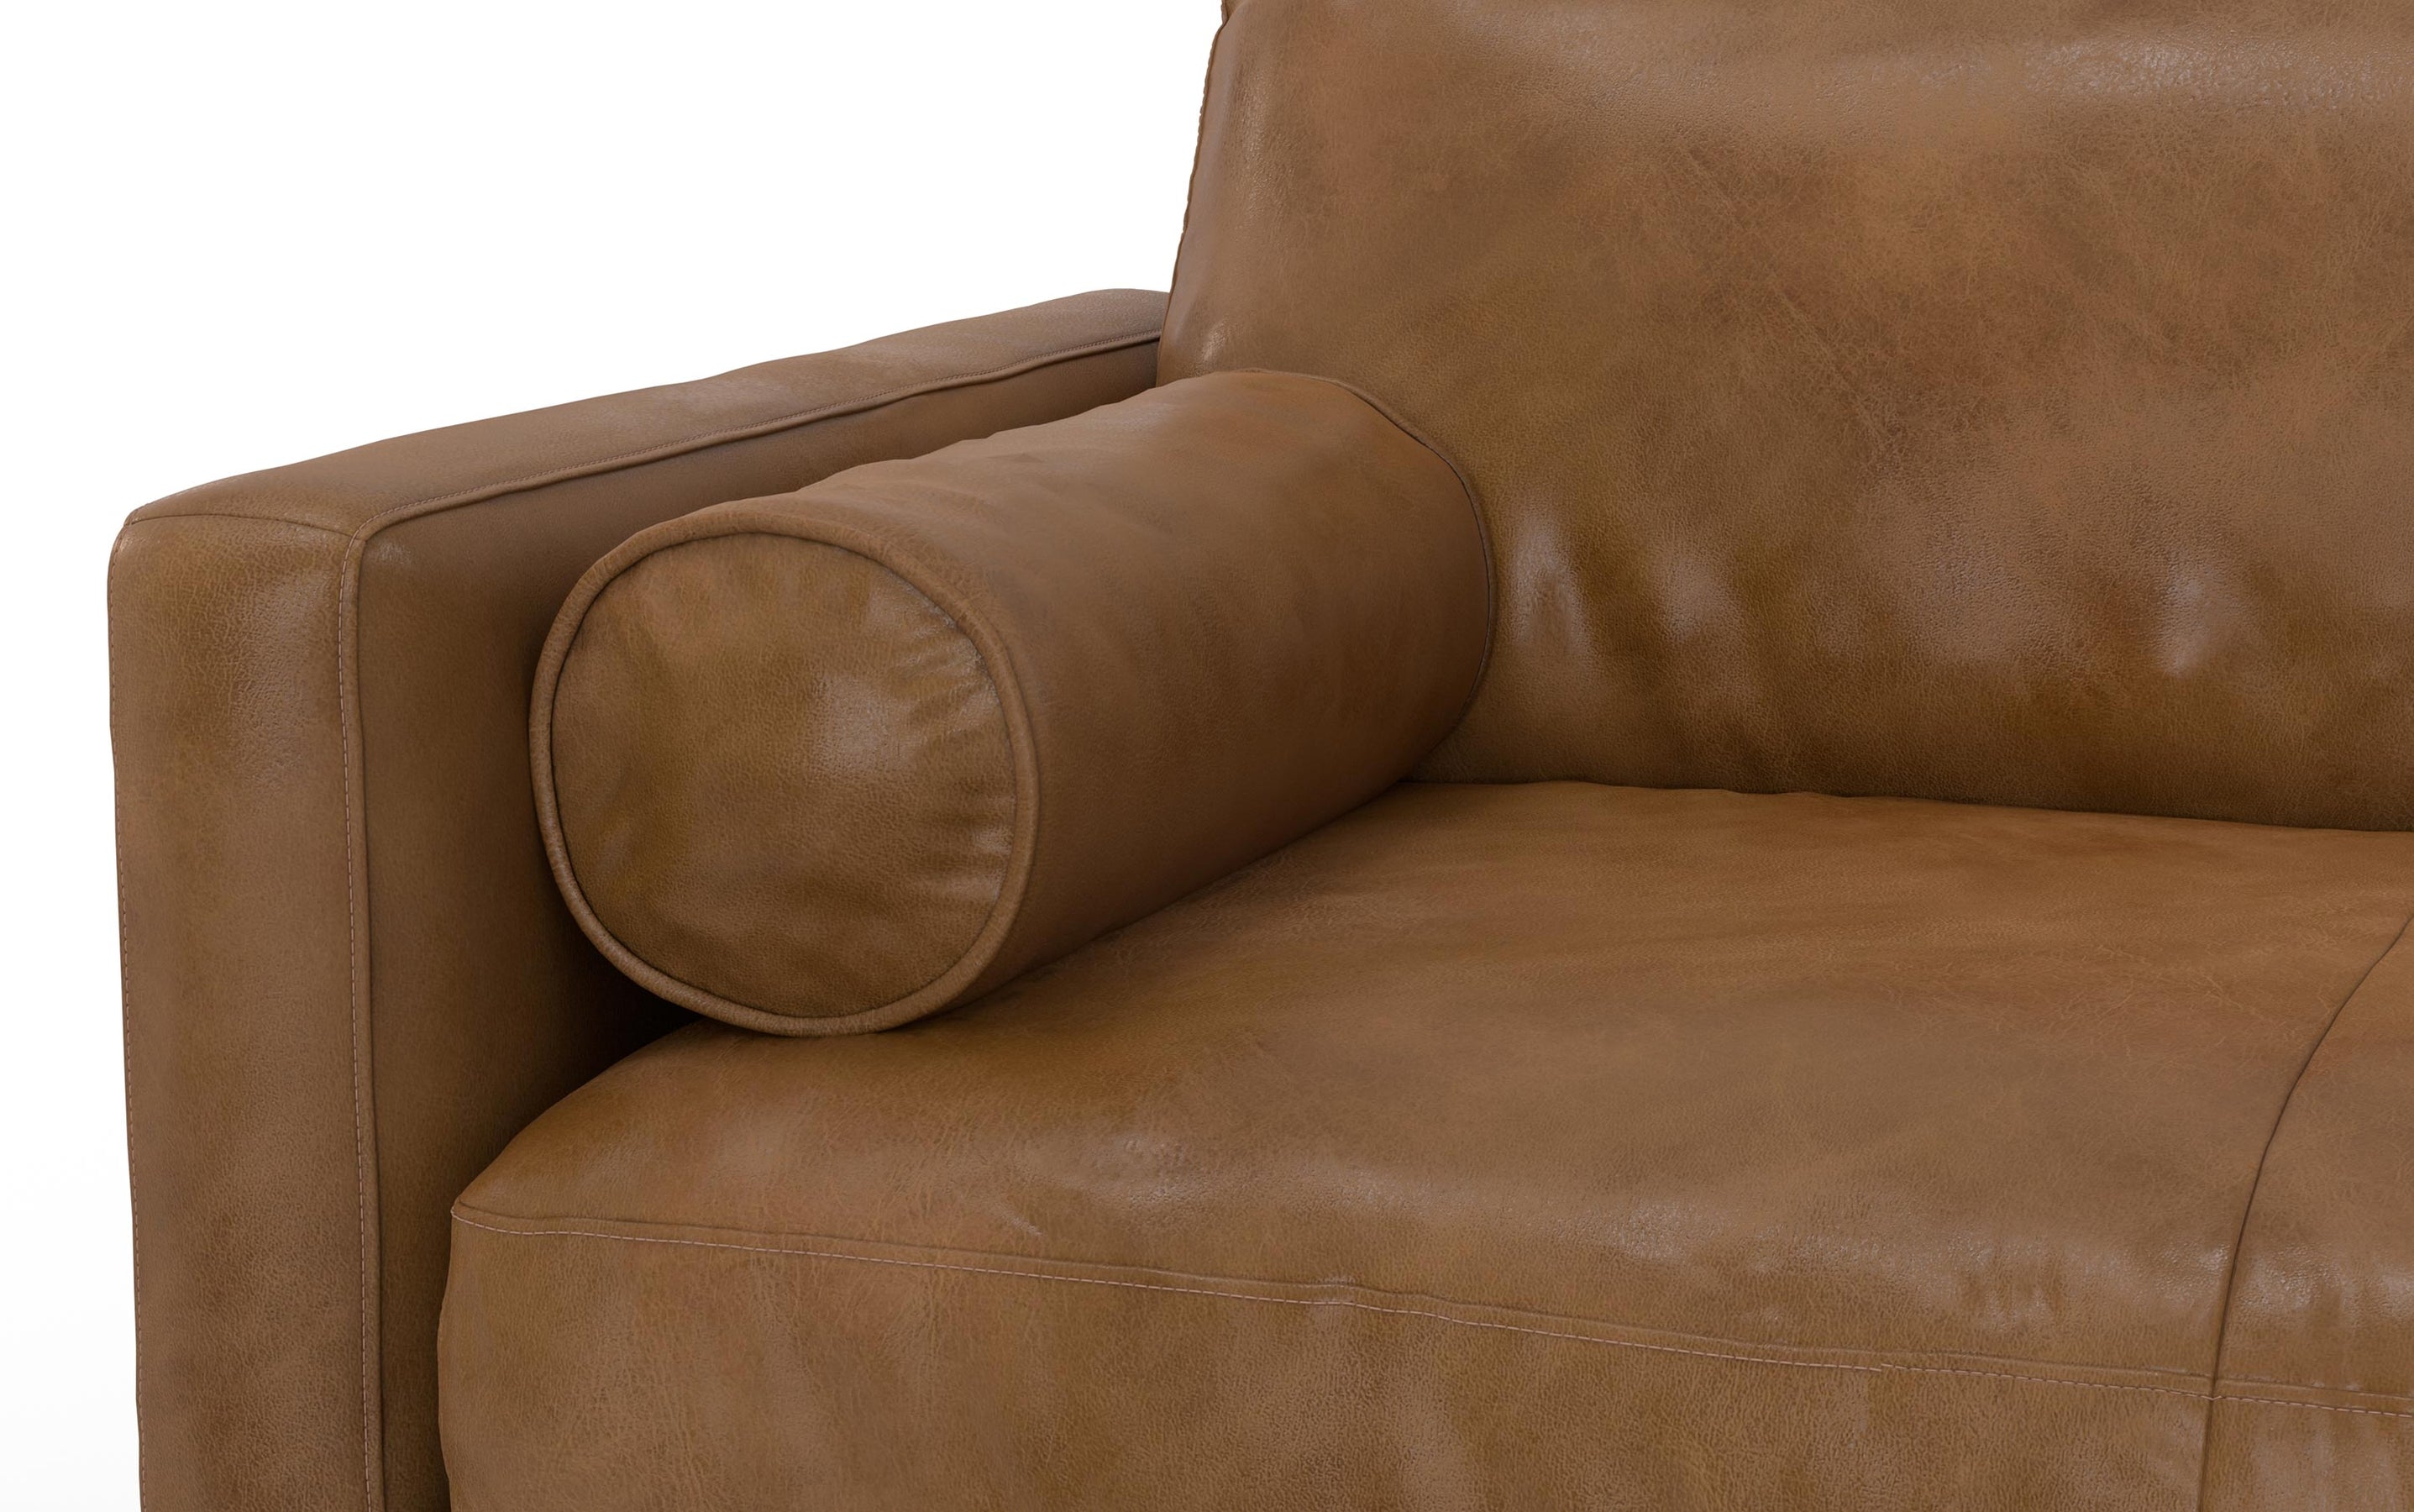 Caramel Brown Genuine Top Grain Leather | Morrison Mid Century Sectional in Genuine Leather